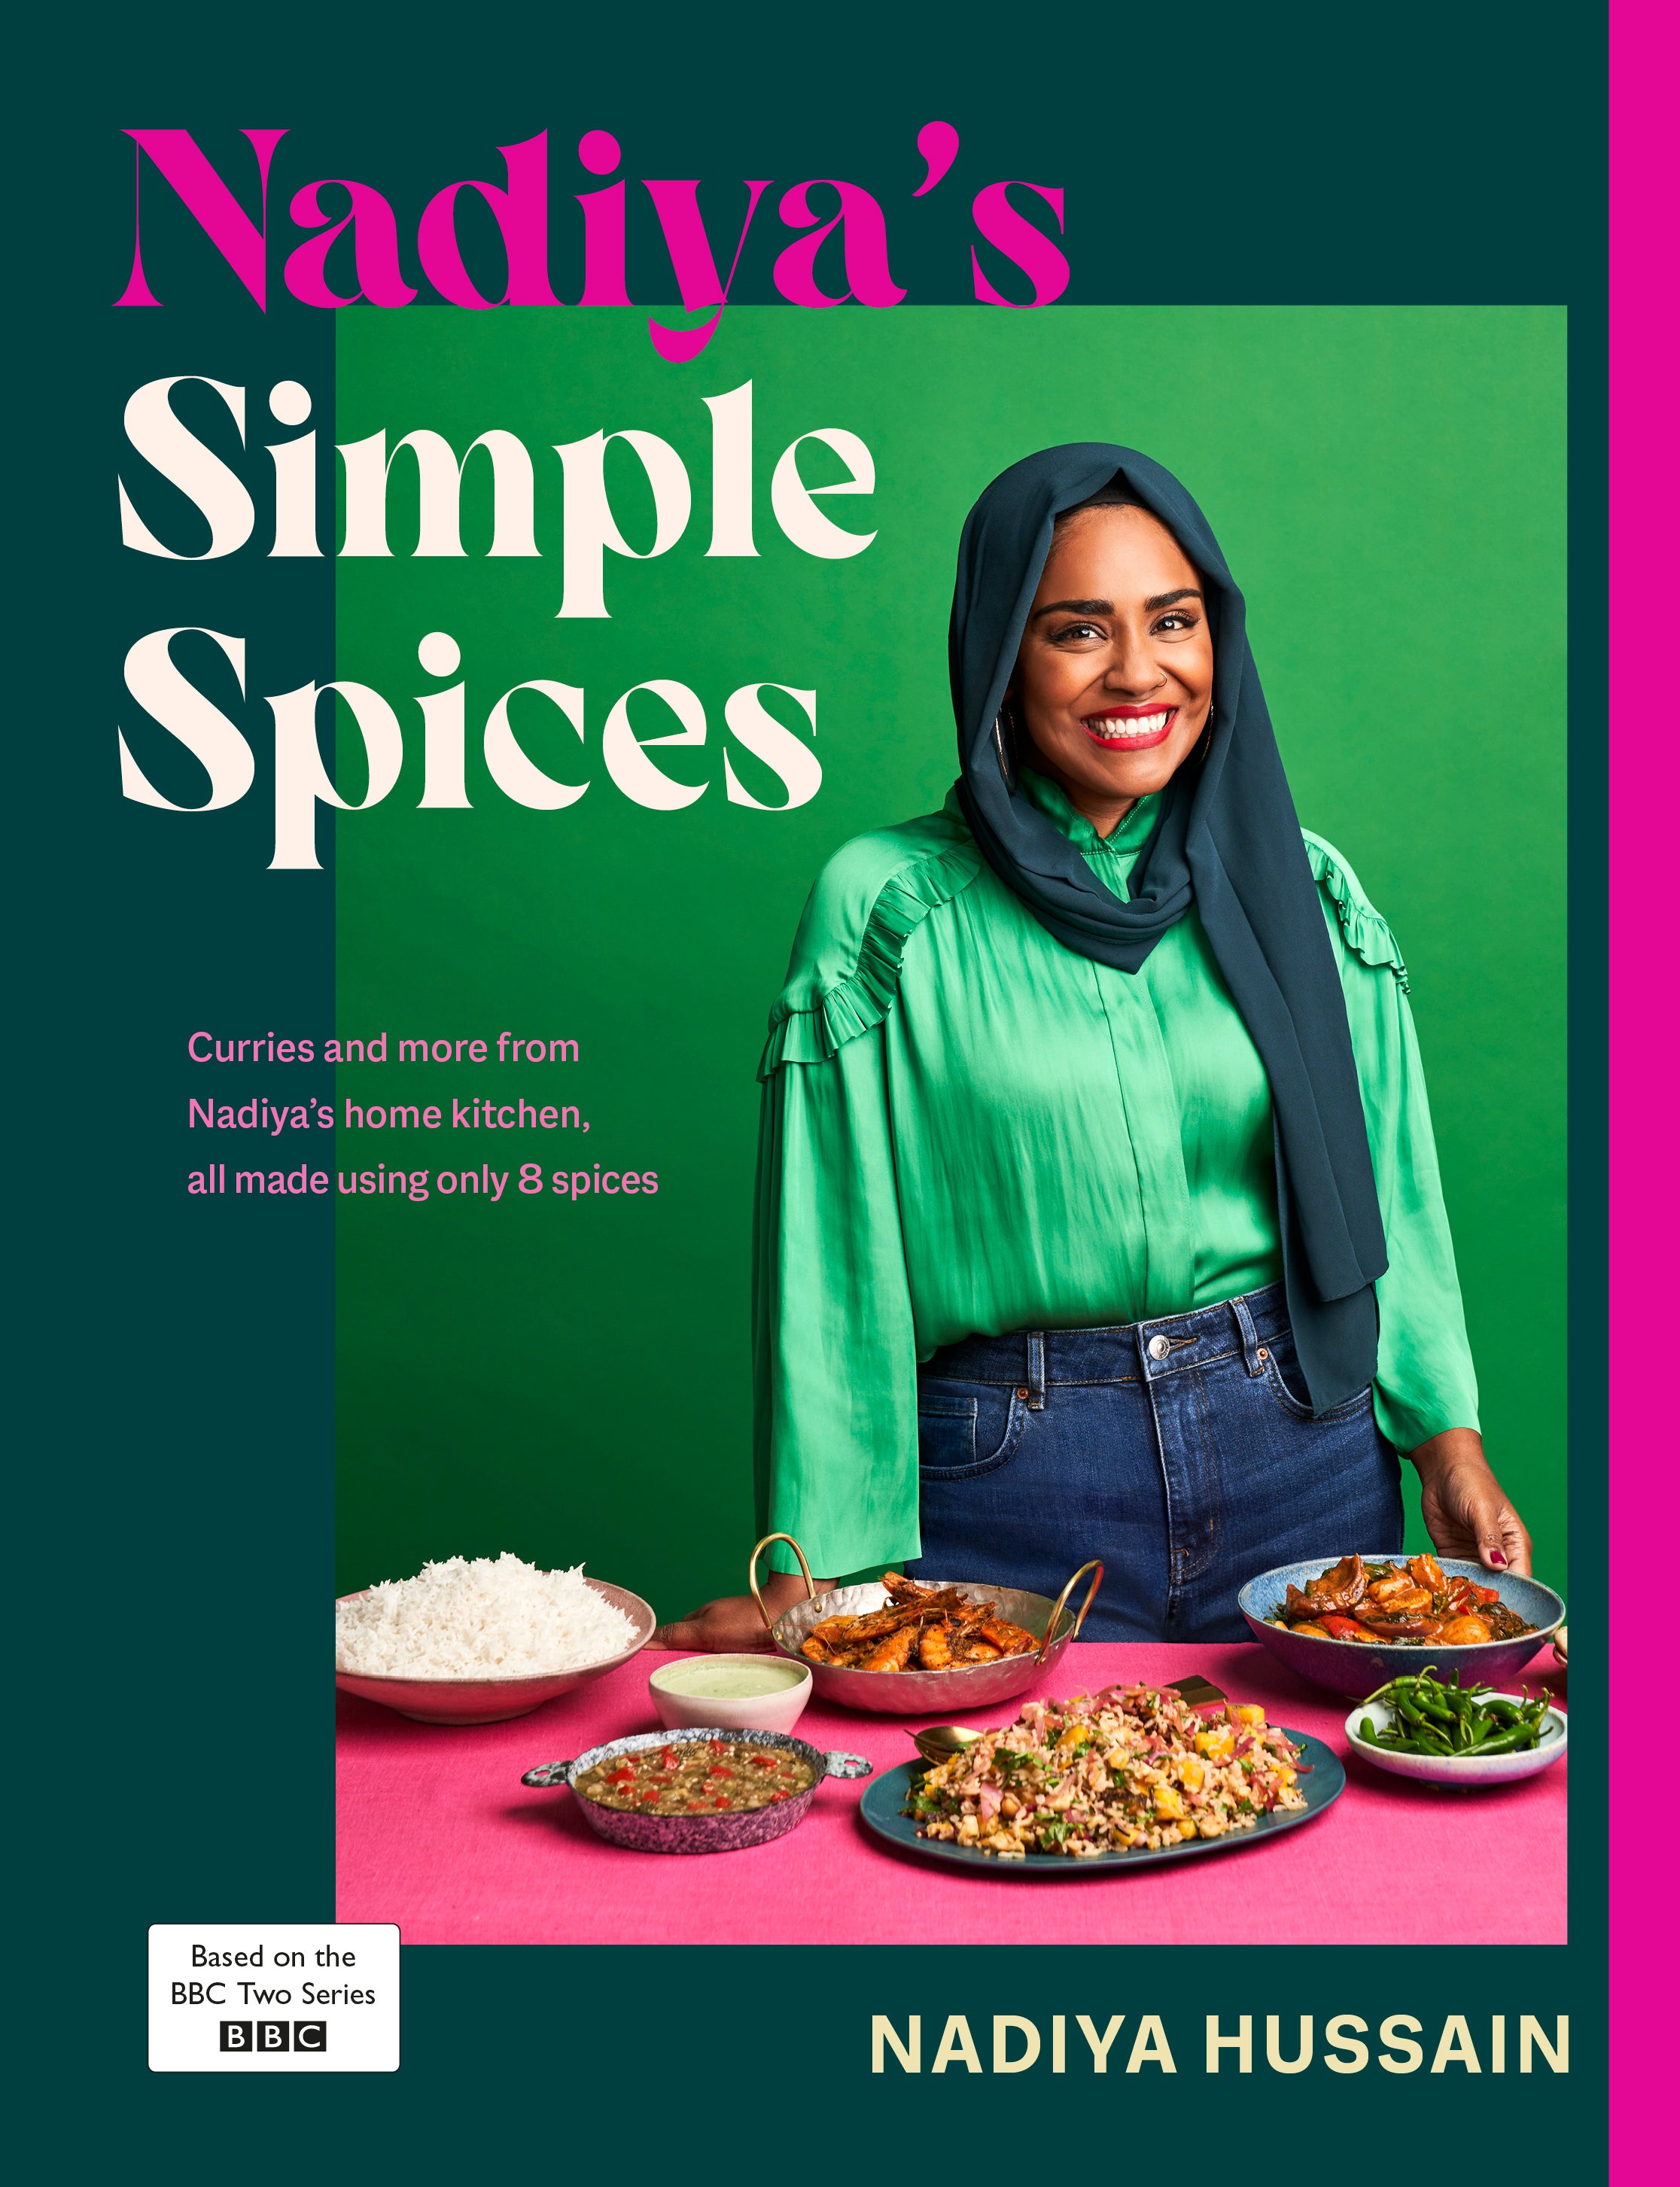 ‘Nadiya’s Simple Spices’ is Hussain’s eighth cookbook